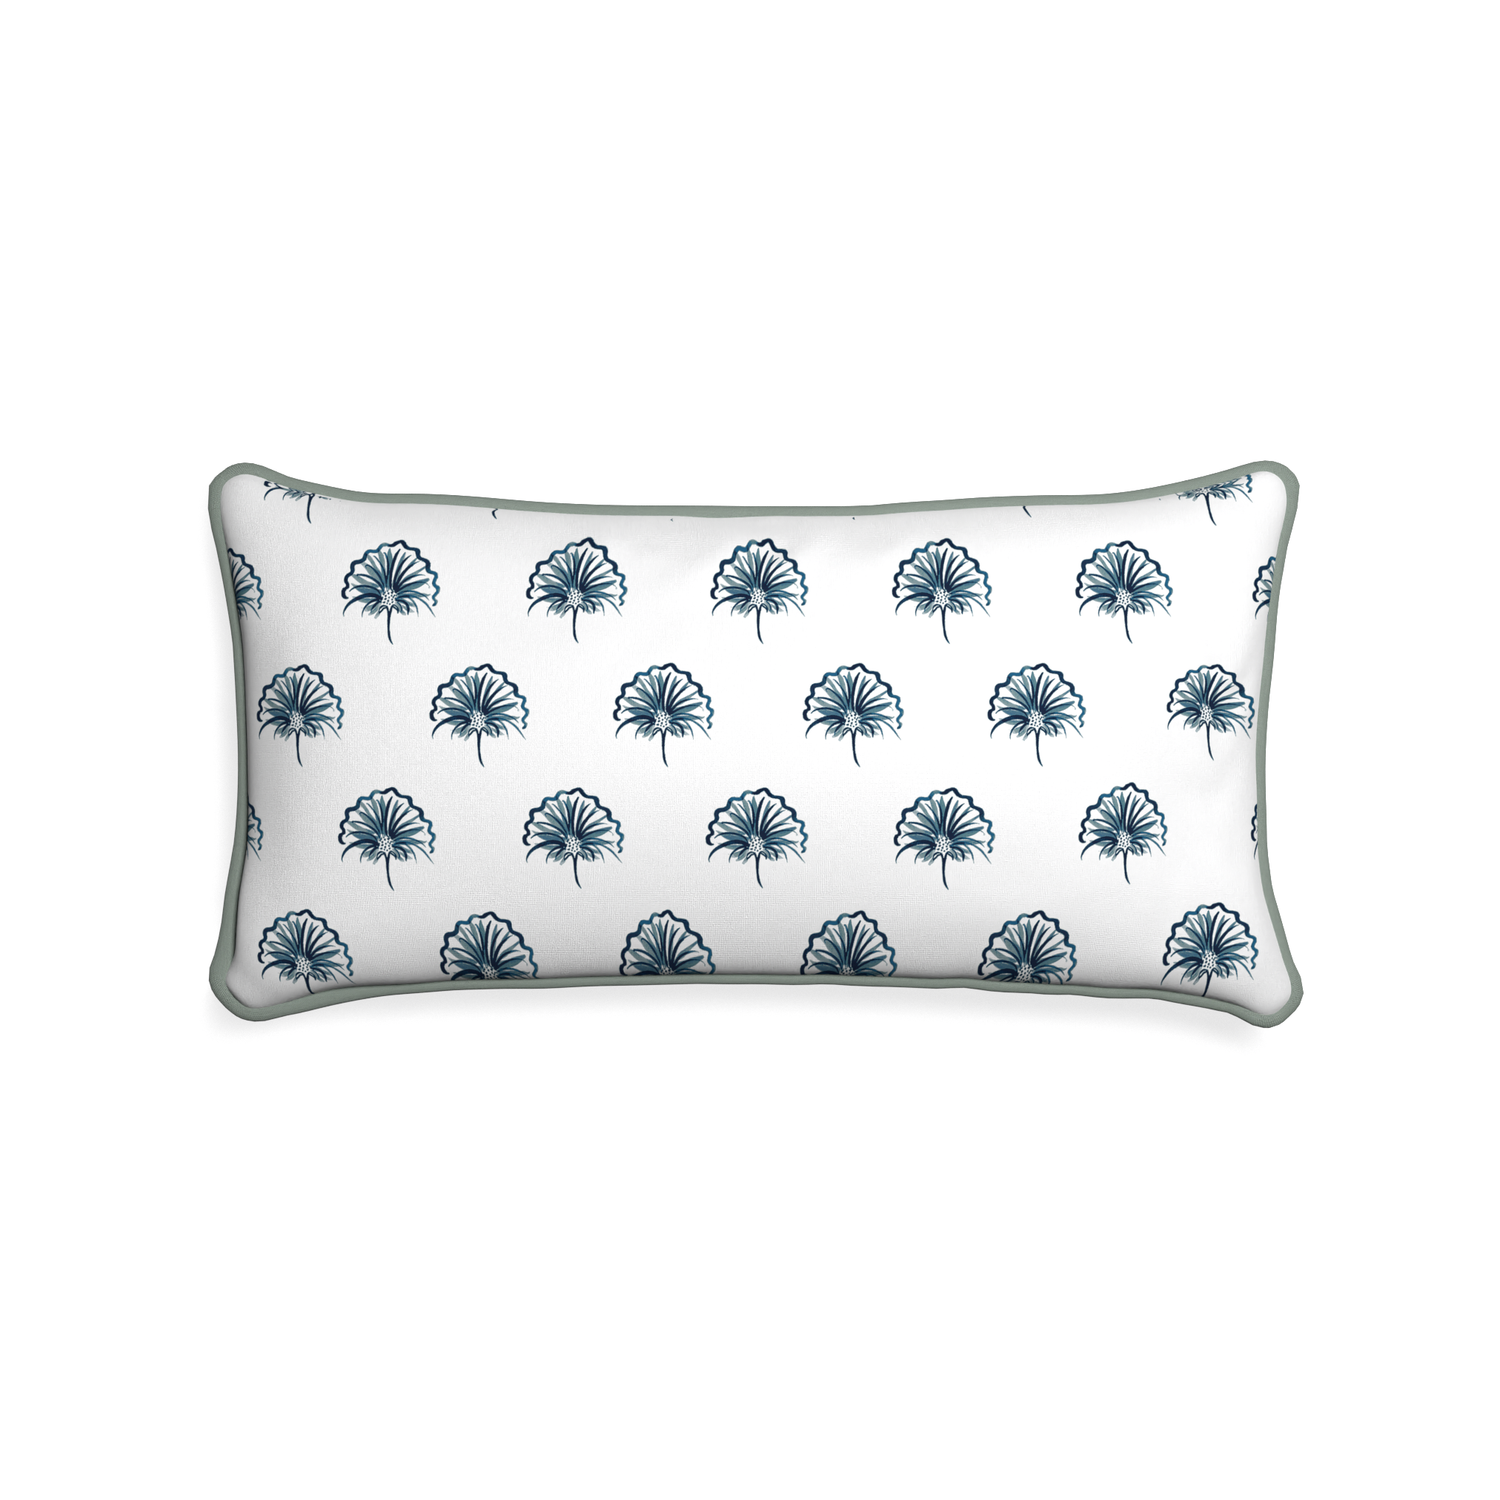 Midi-lumbar penelope midnight custom floral navypillow with sage piping on white background